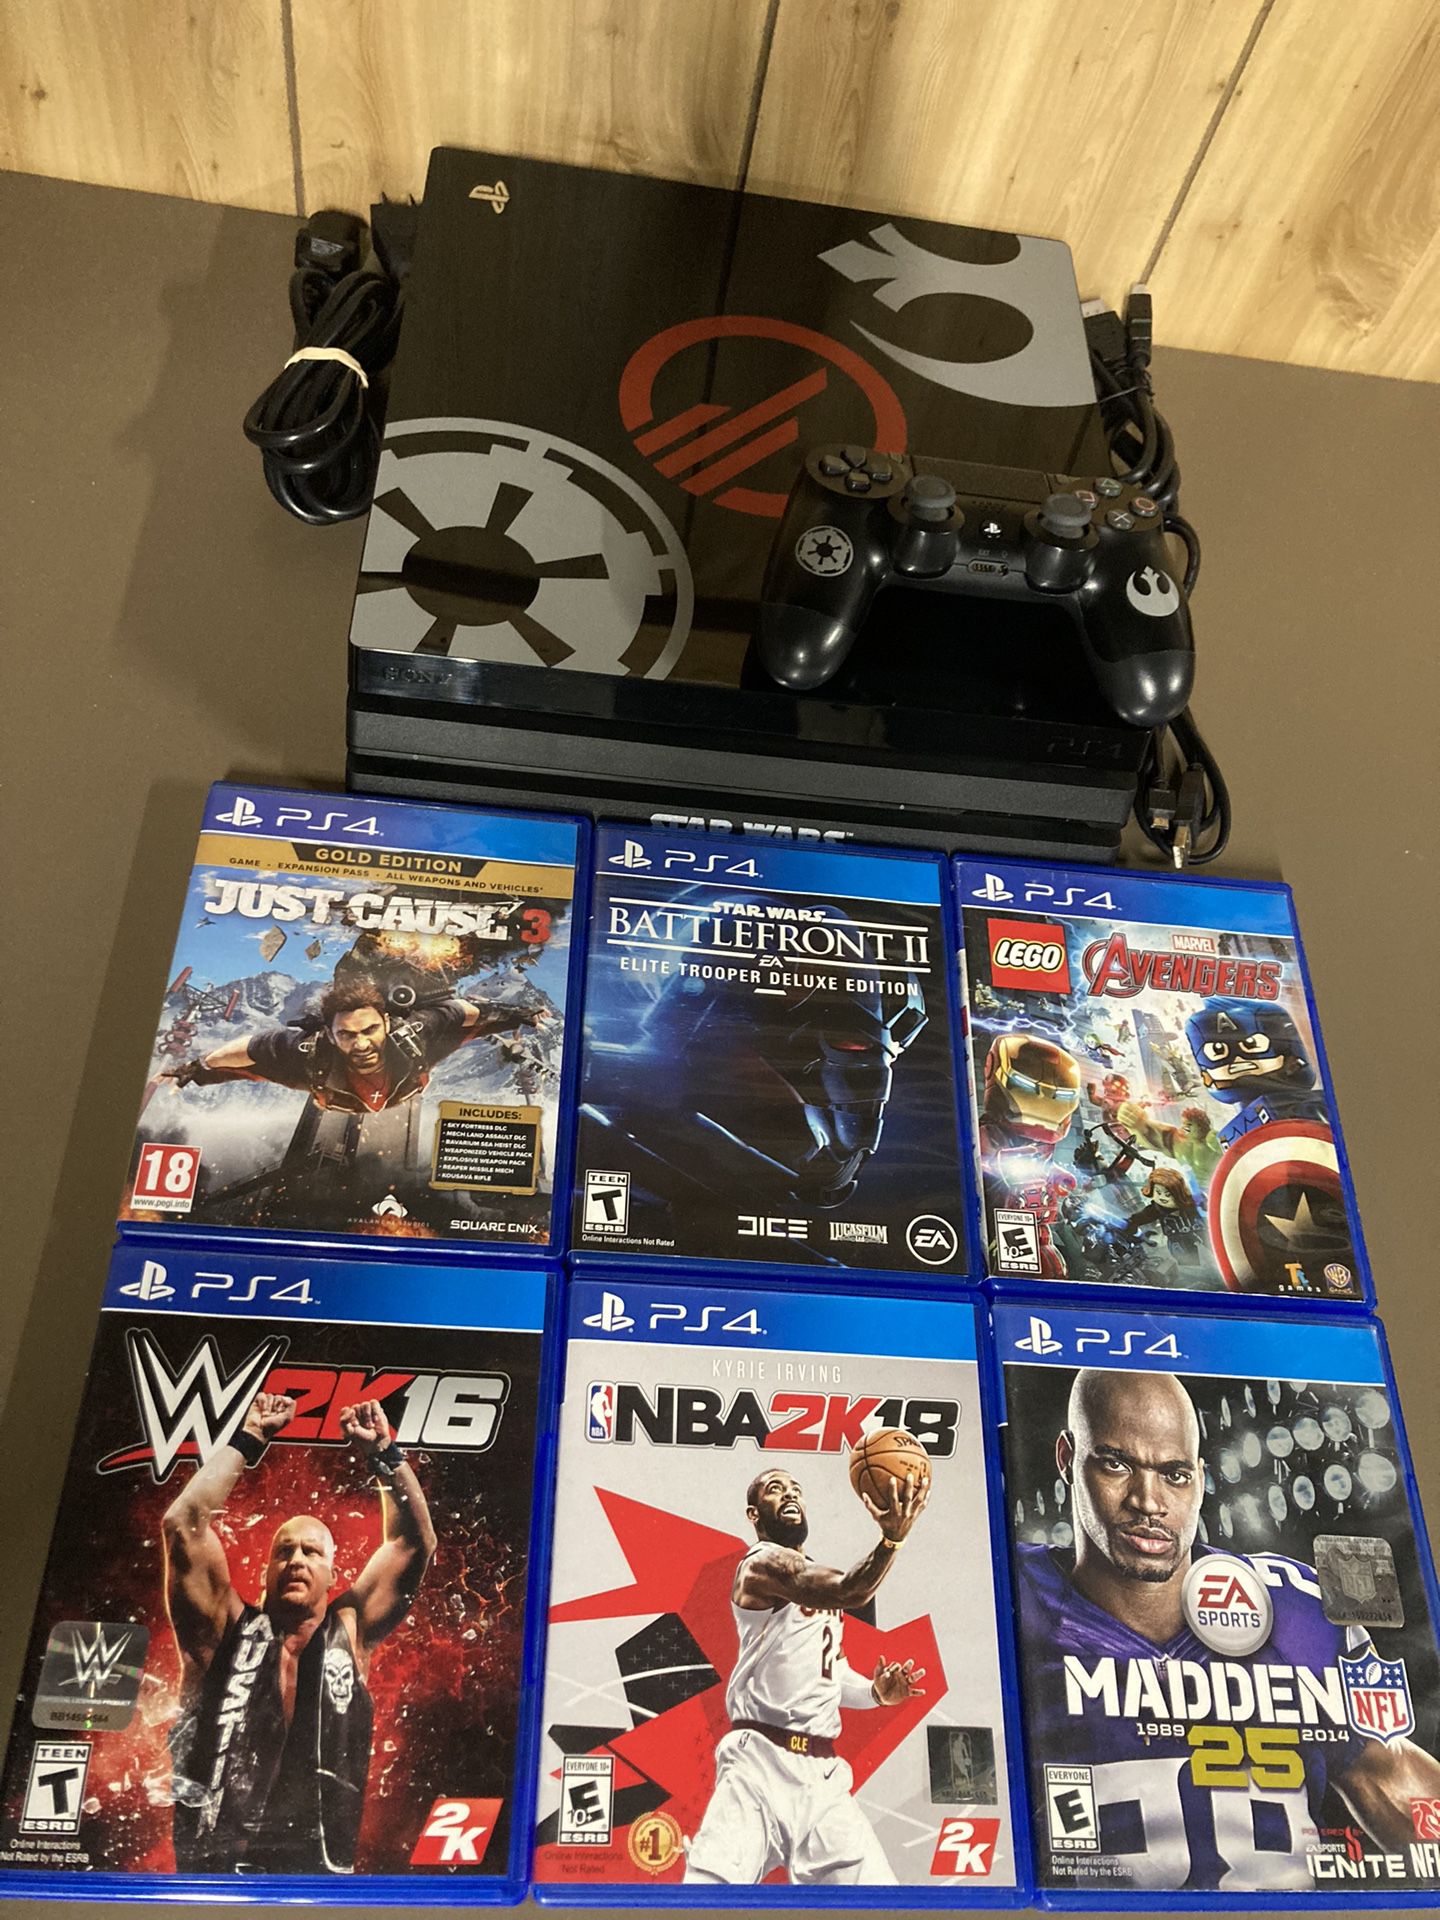 masser orm koncert PlayStation 4 Pro Star Wars Edition 1TB PS4 With 6 Cool Popular Games  Original Remote Ready To Play for Sale in Bensenville, IL - OfferUp